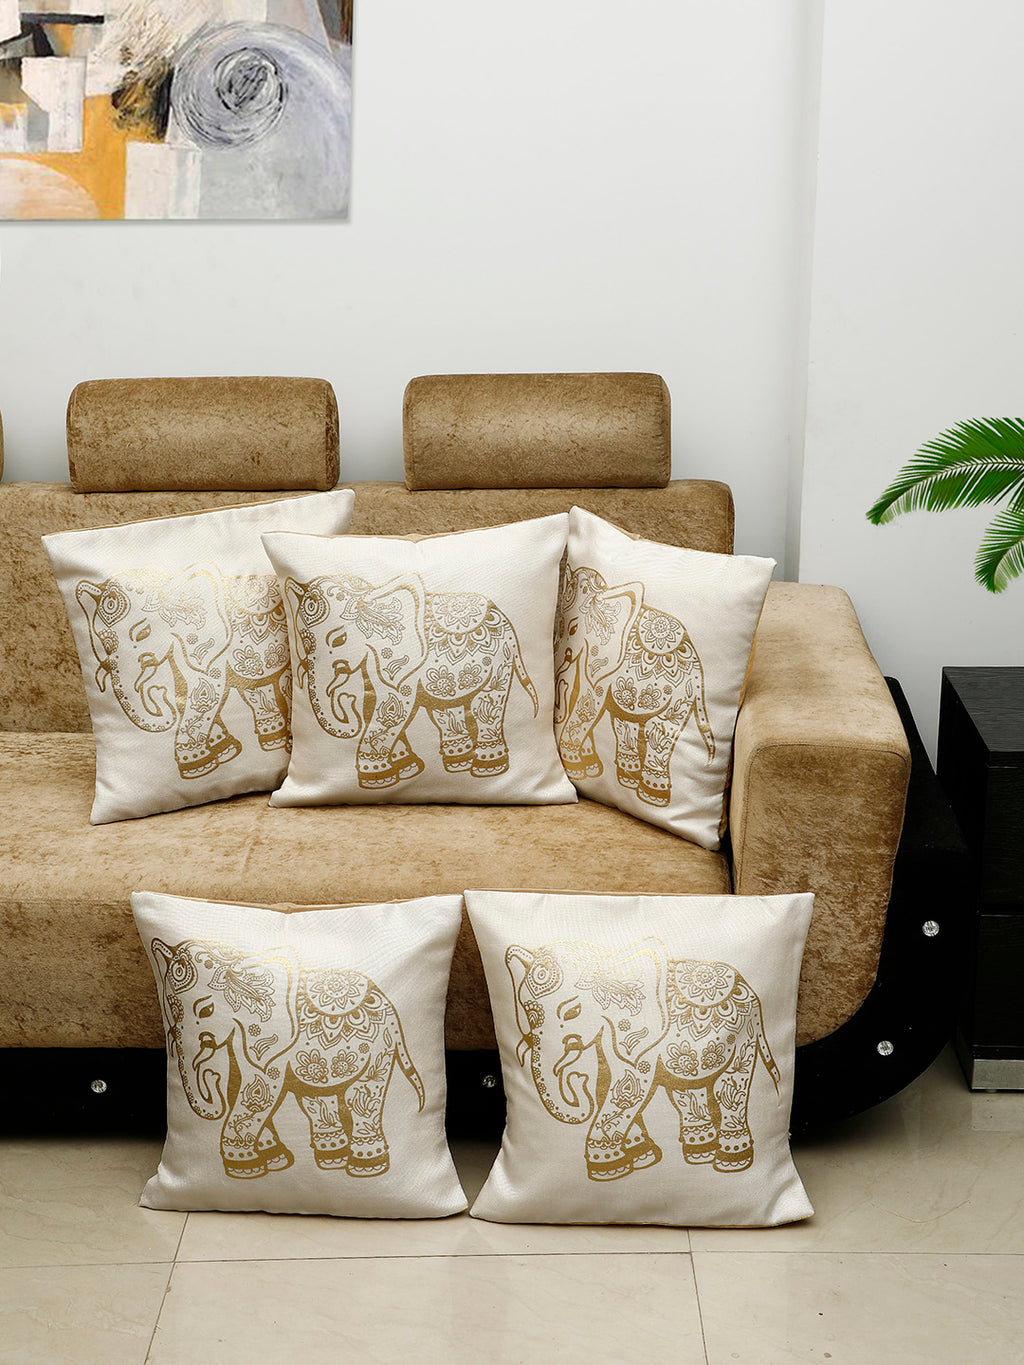 Detec™ Hosta Beige Golden Elephant Printed 16 x 16 inches Cushion Cover (Set of 5)